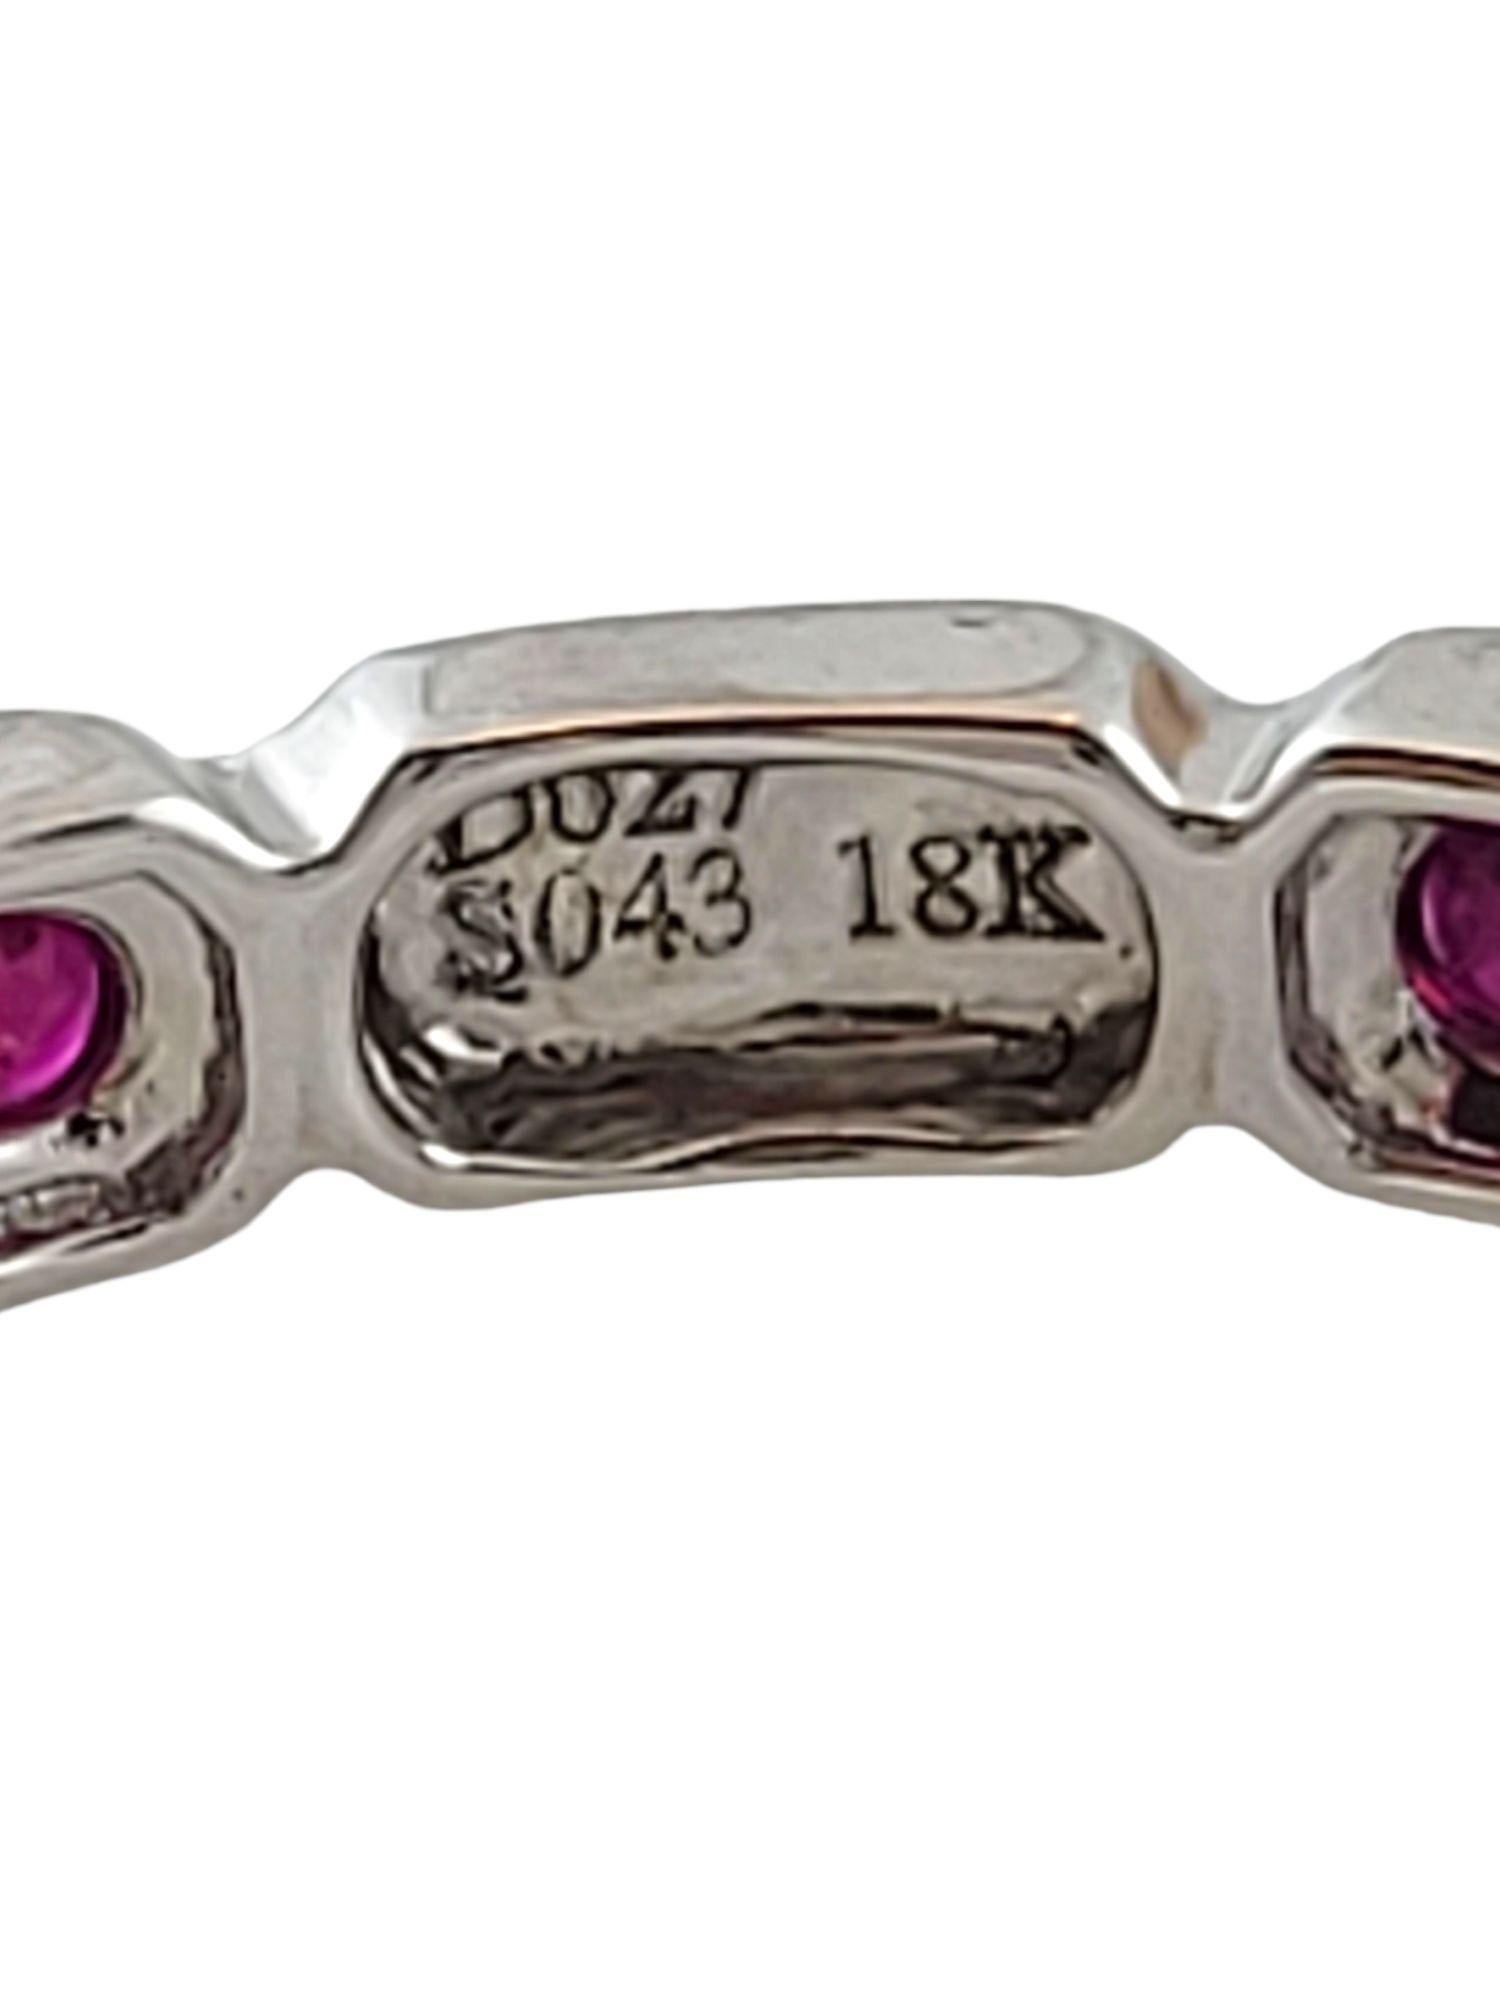 18K White Gold Diamond & Ruby Eternity Band Size 6.75 #14773 In Good Condition For Sale In Washington Depot, CT